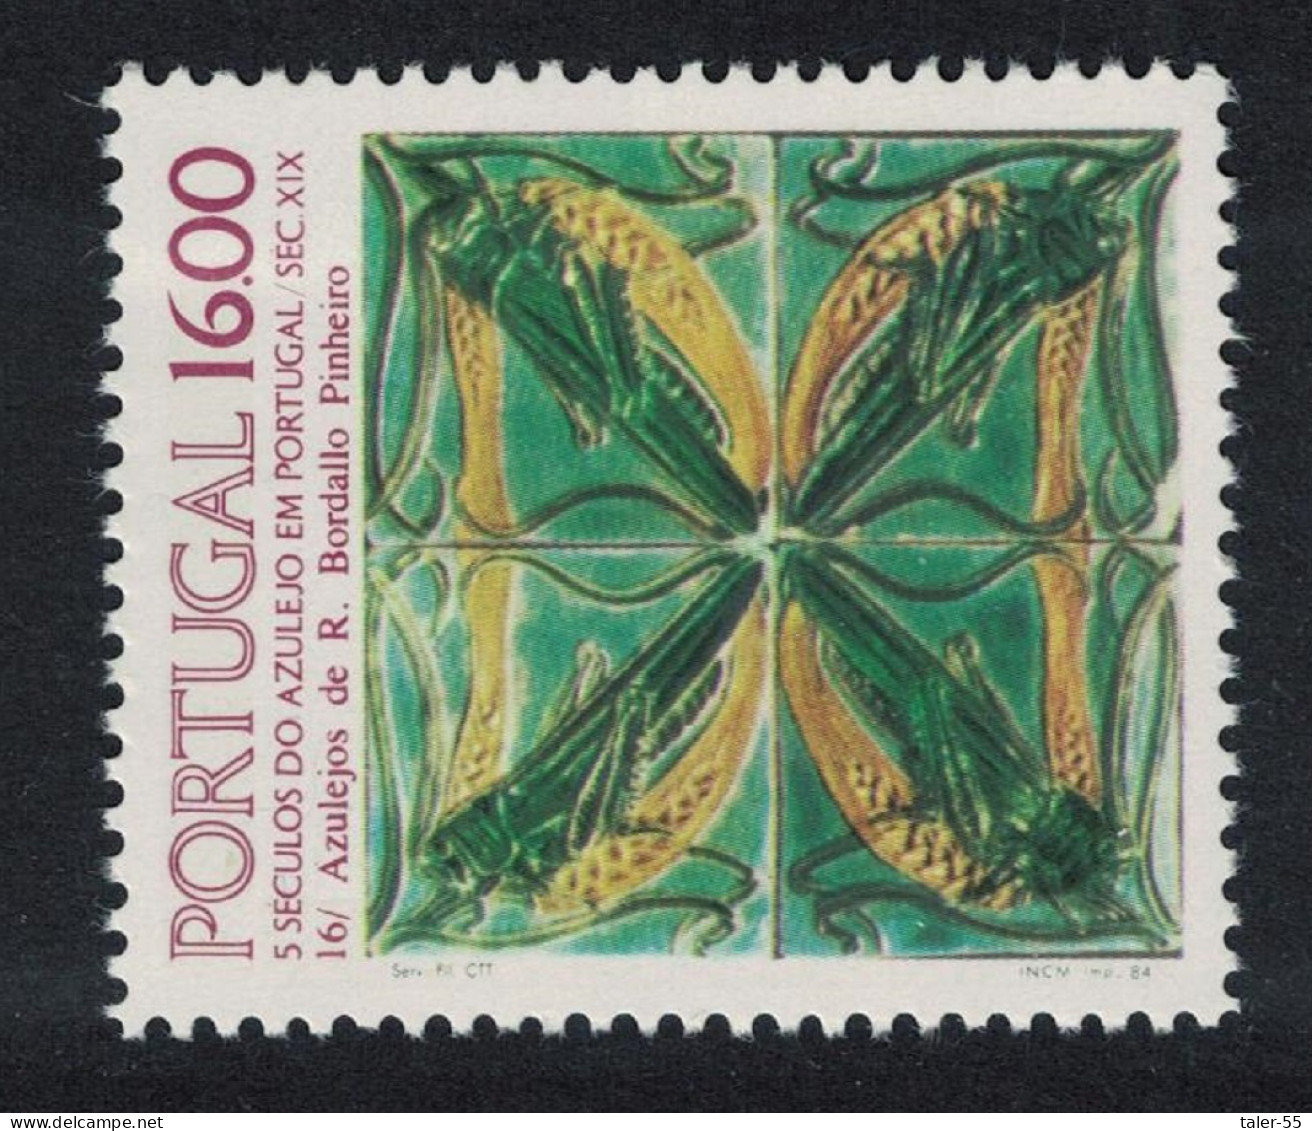 Portugal Tiles 16th Series 1984 MNH SG#1976 - Unused Stamps